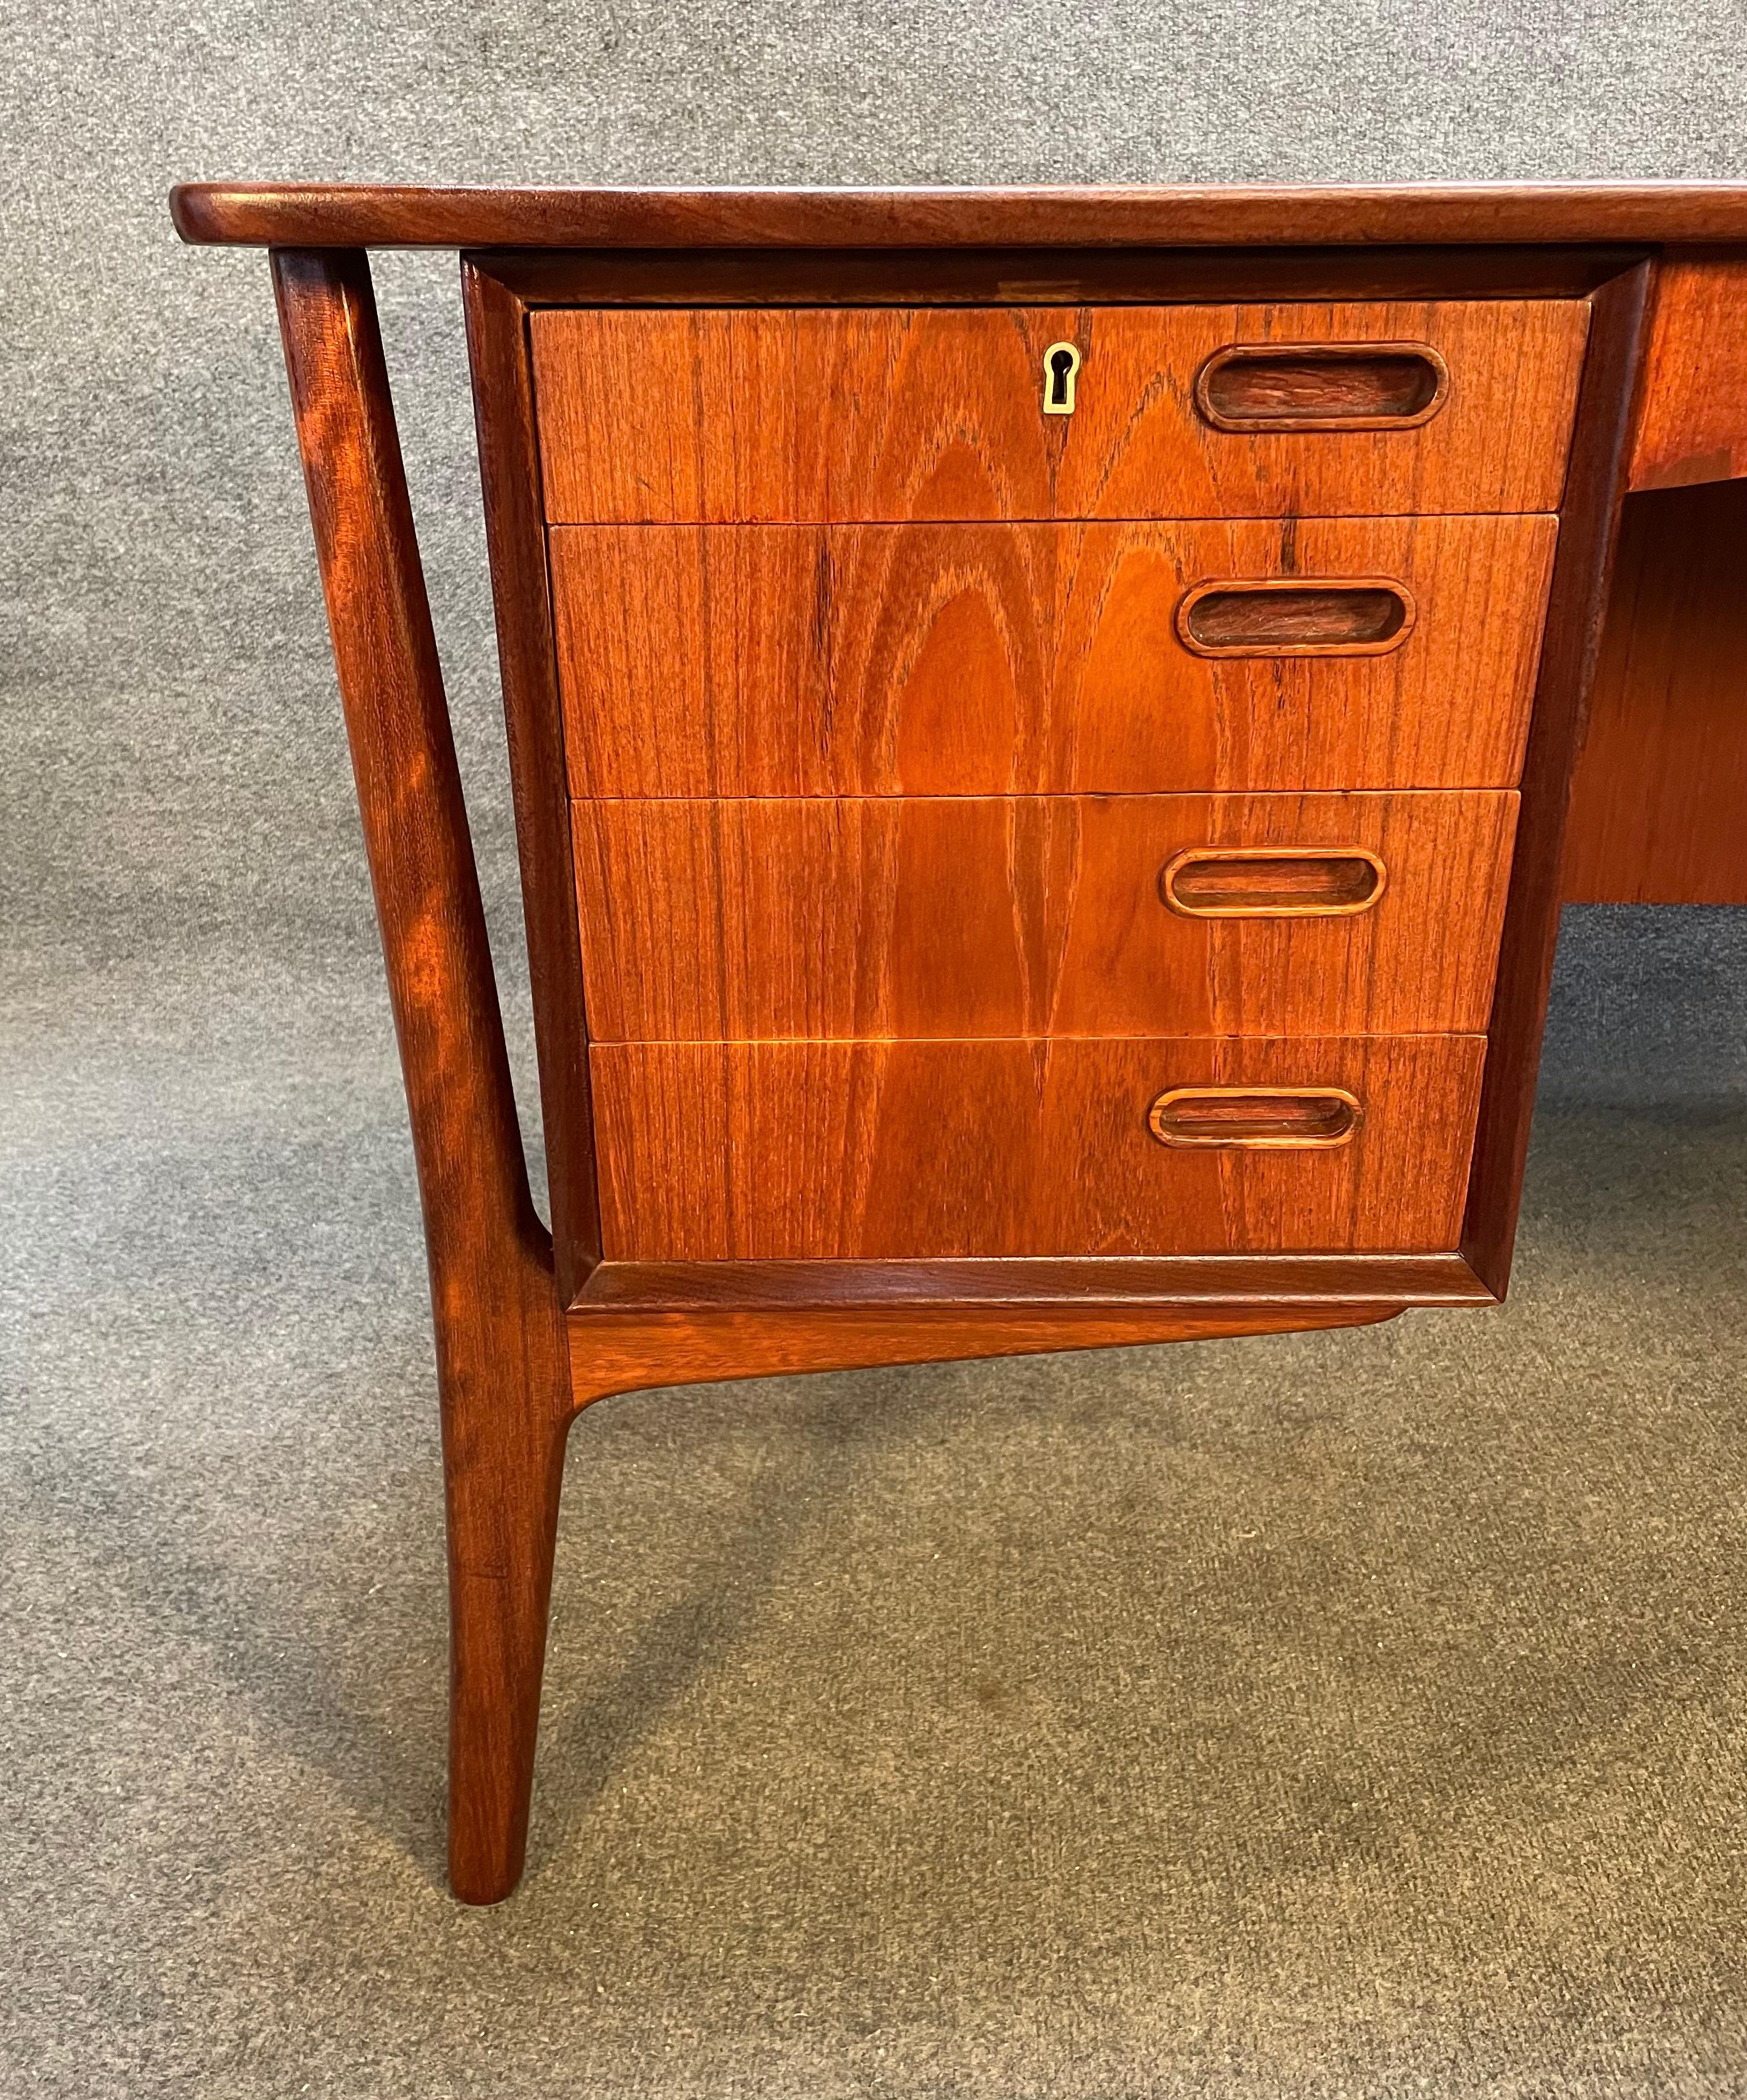 Here is a beautiful and sought after scandinavian modern executive desk in teak designed by Svend Madsen and manufactured by HOP Hansen in Denmark in the 1960's.
This special desk, recently imported from Europe to California before its refinishing,